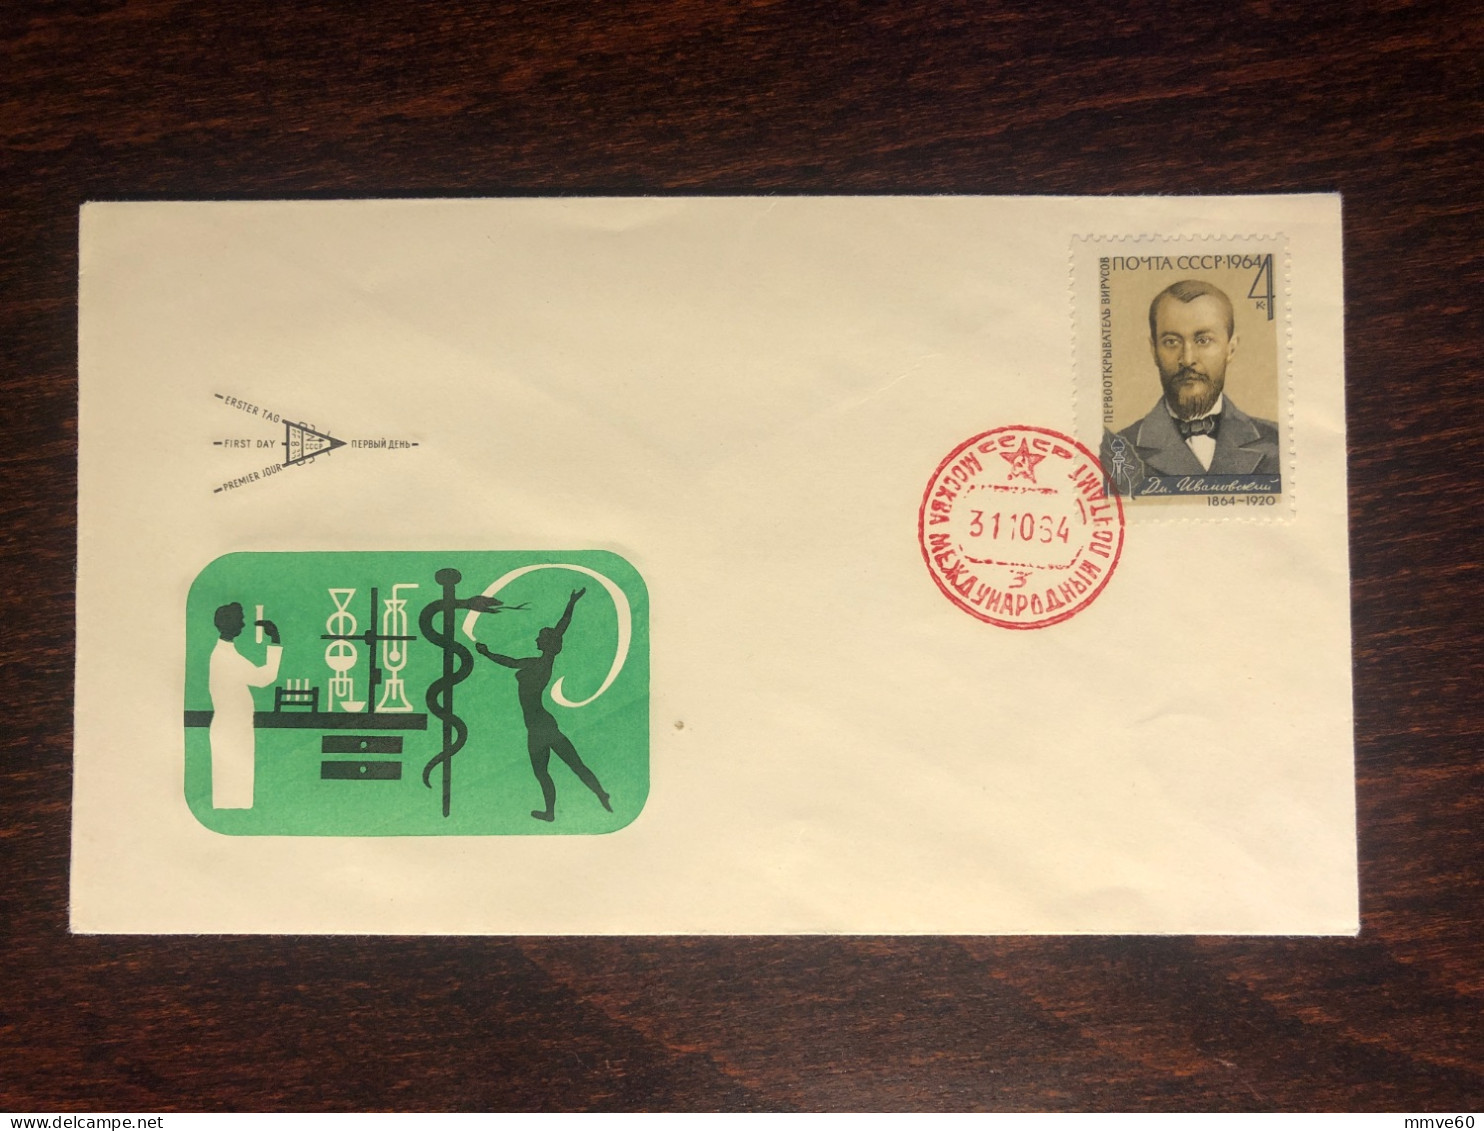 RUSSIA USSR FDC COVER 1964 YEAR IVANOVSKY VIROLOGY BACTERIOLOGY HEALTH MEDICINE STAMPS - Lettres & Documents